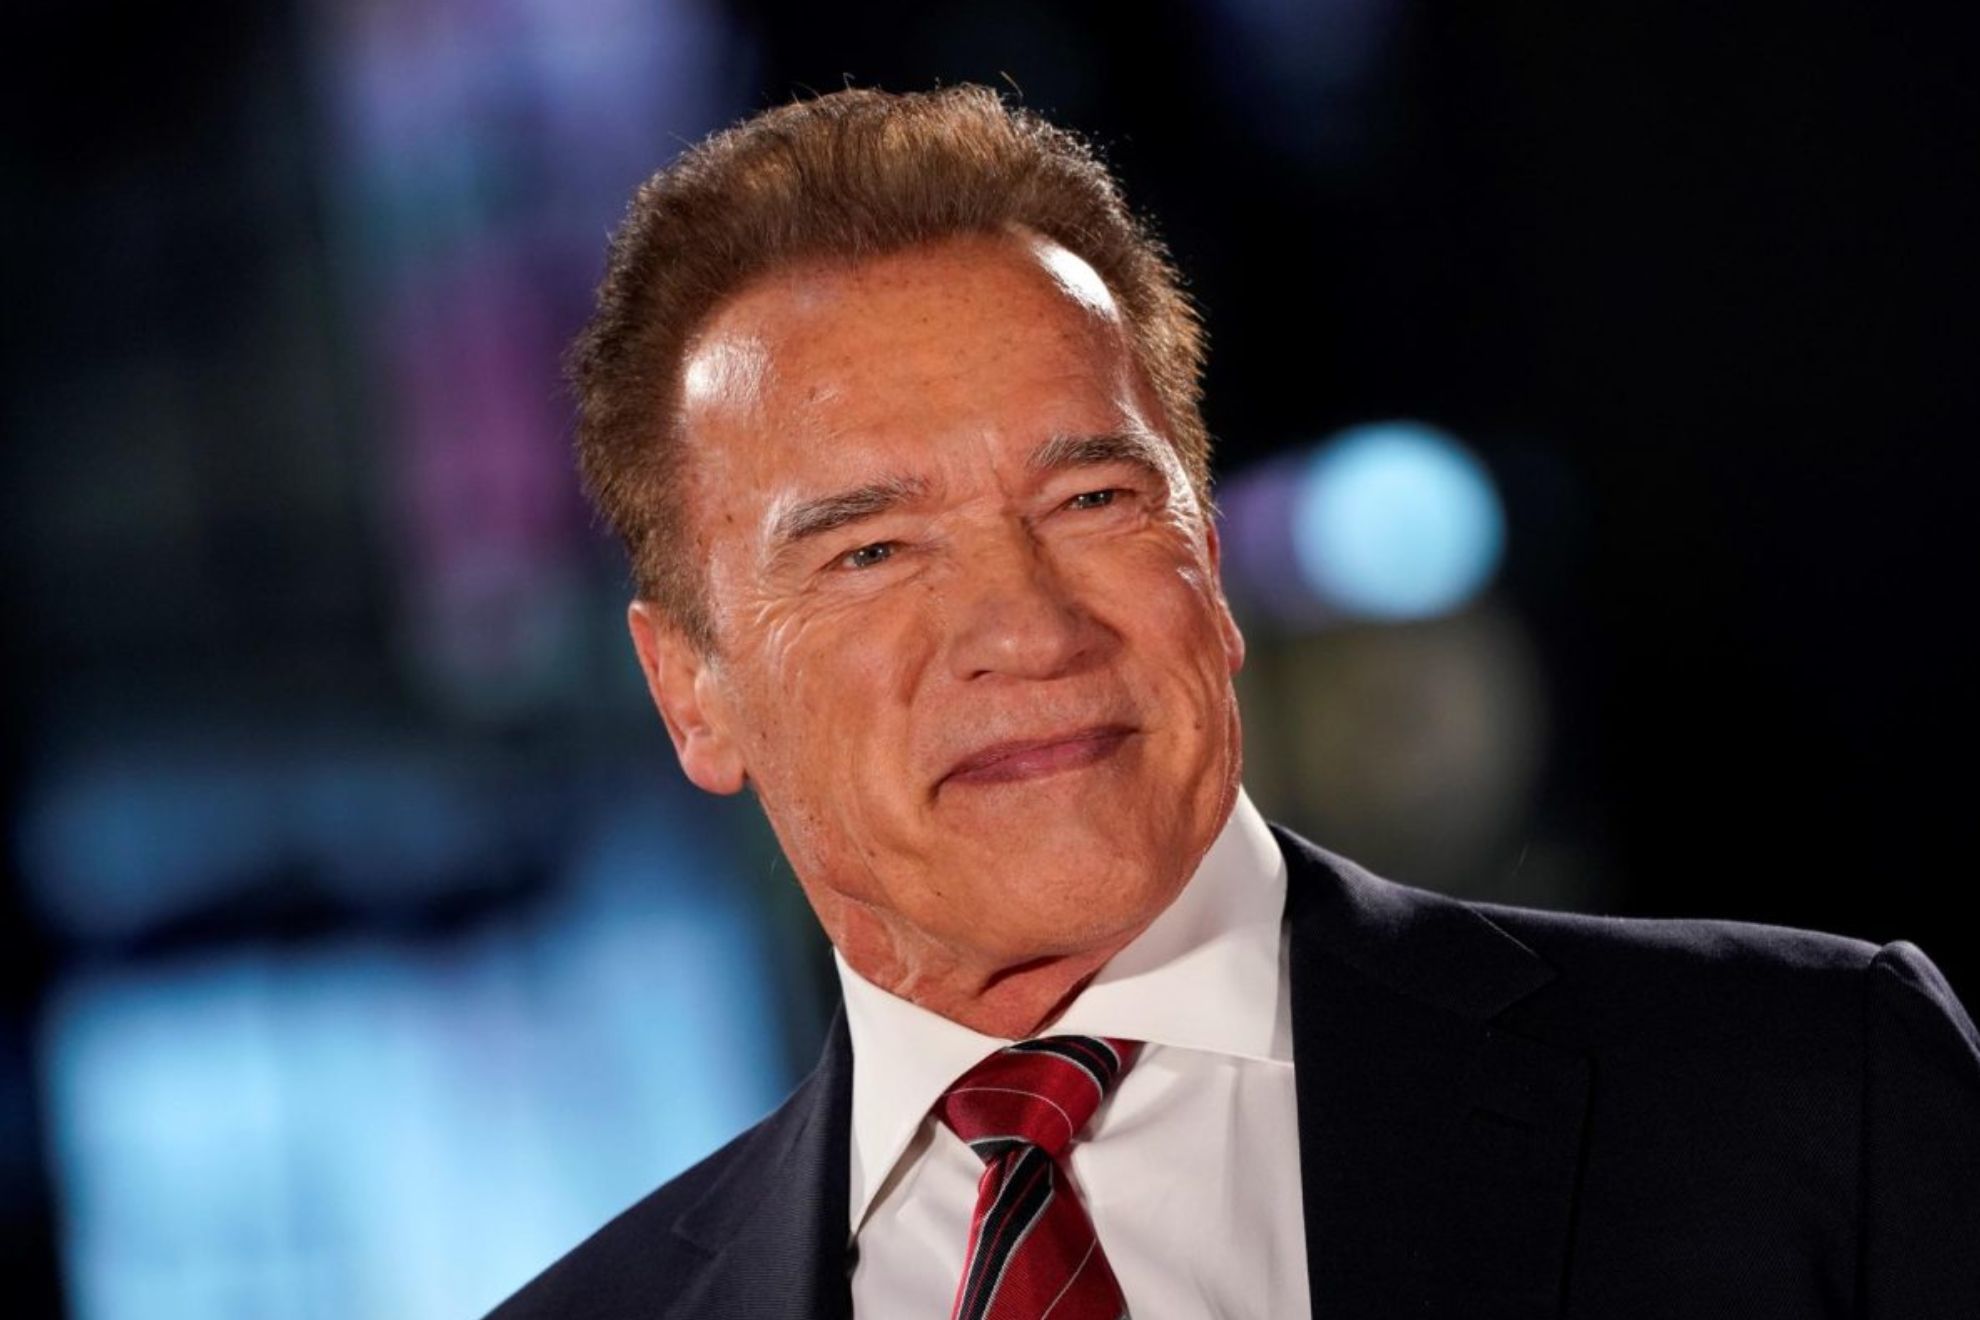 Arnold Schwarzenegger reveals he had a pacemaker fitted last week